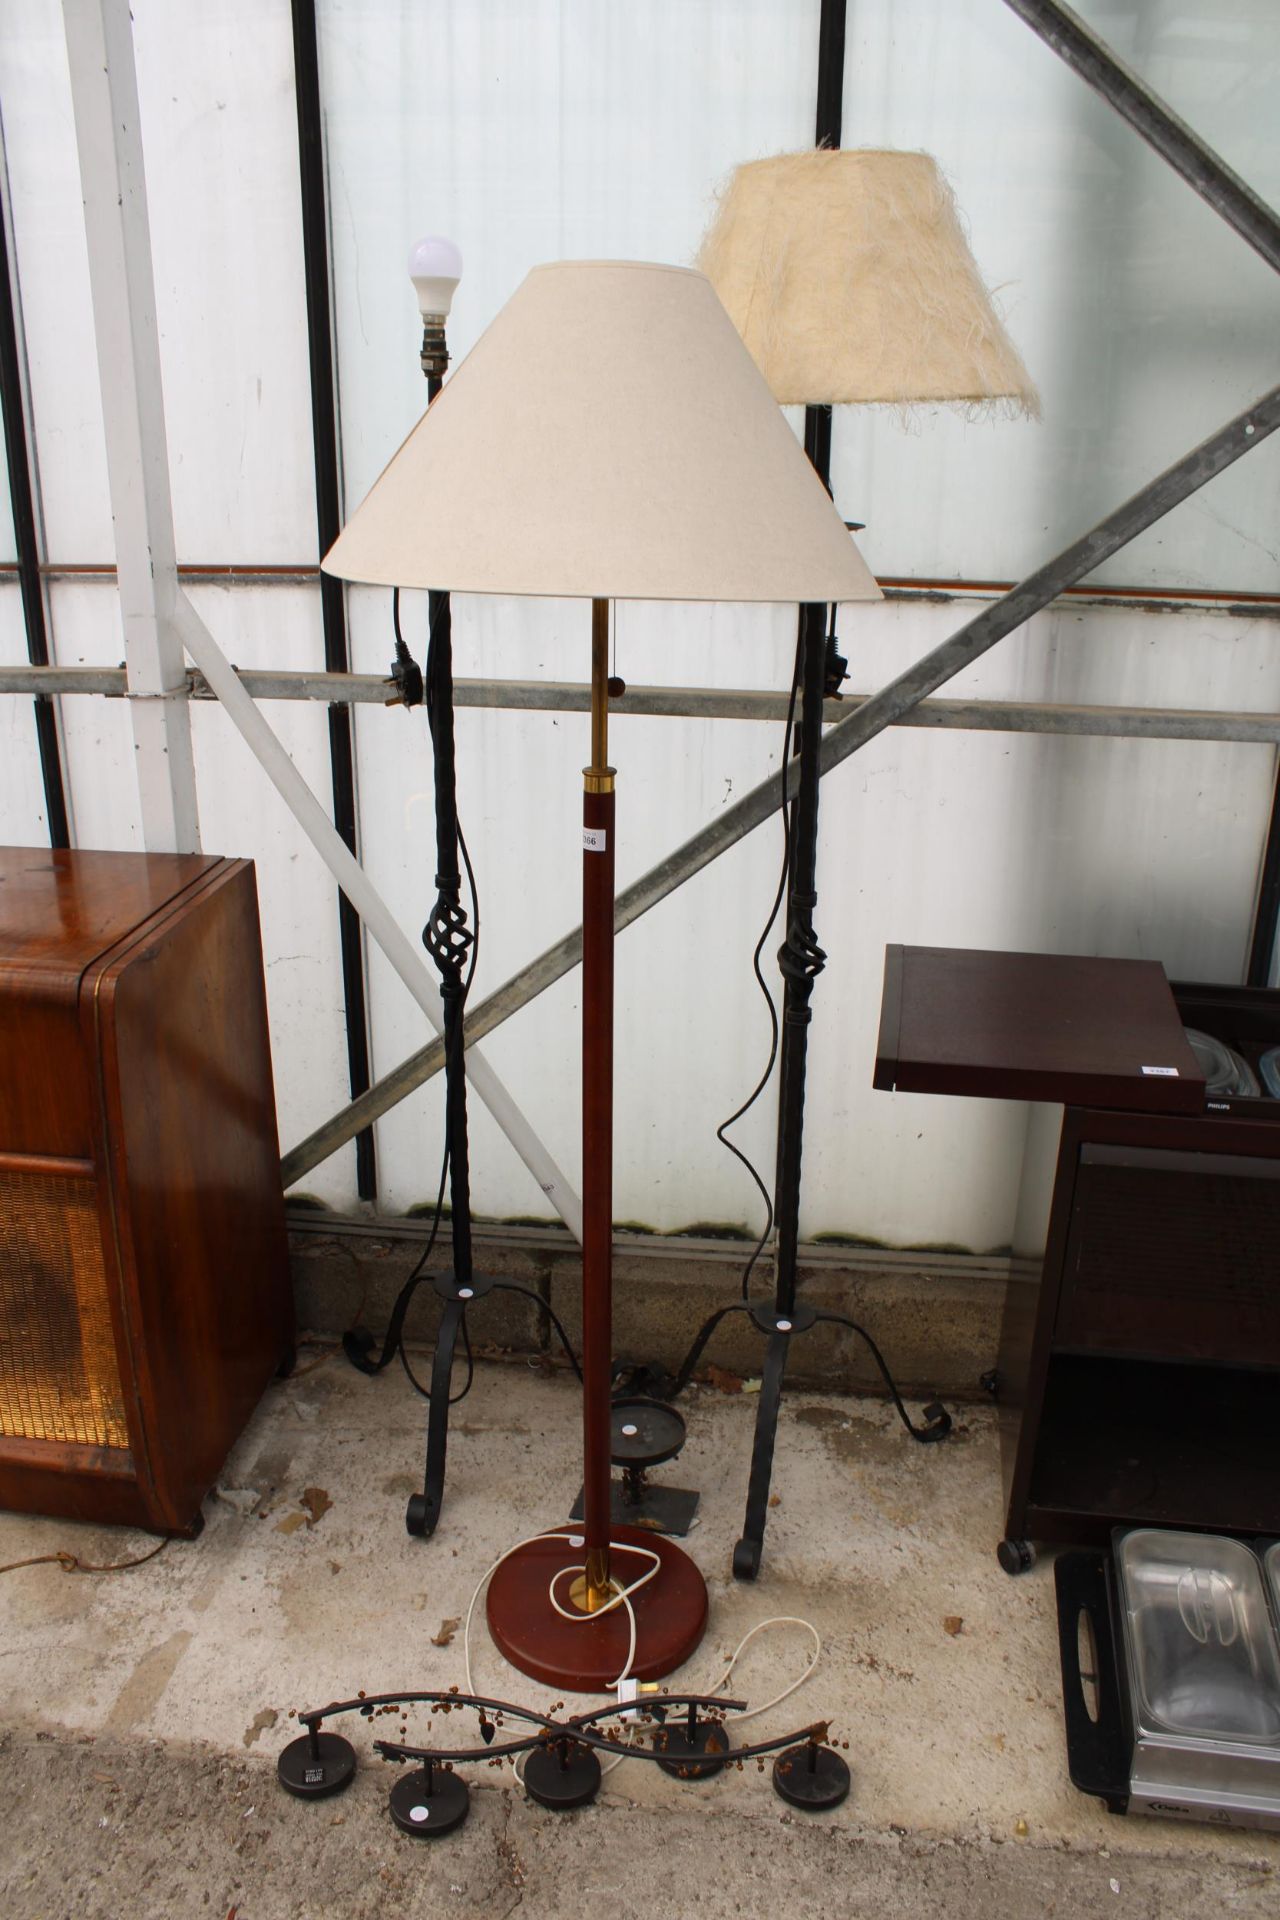 A COLLECTION OF LAMPS TO INCLUDE A WOODEN STANDARD LAMP WITH SHADE AND TWO FURTHER WROUGHT IRON